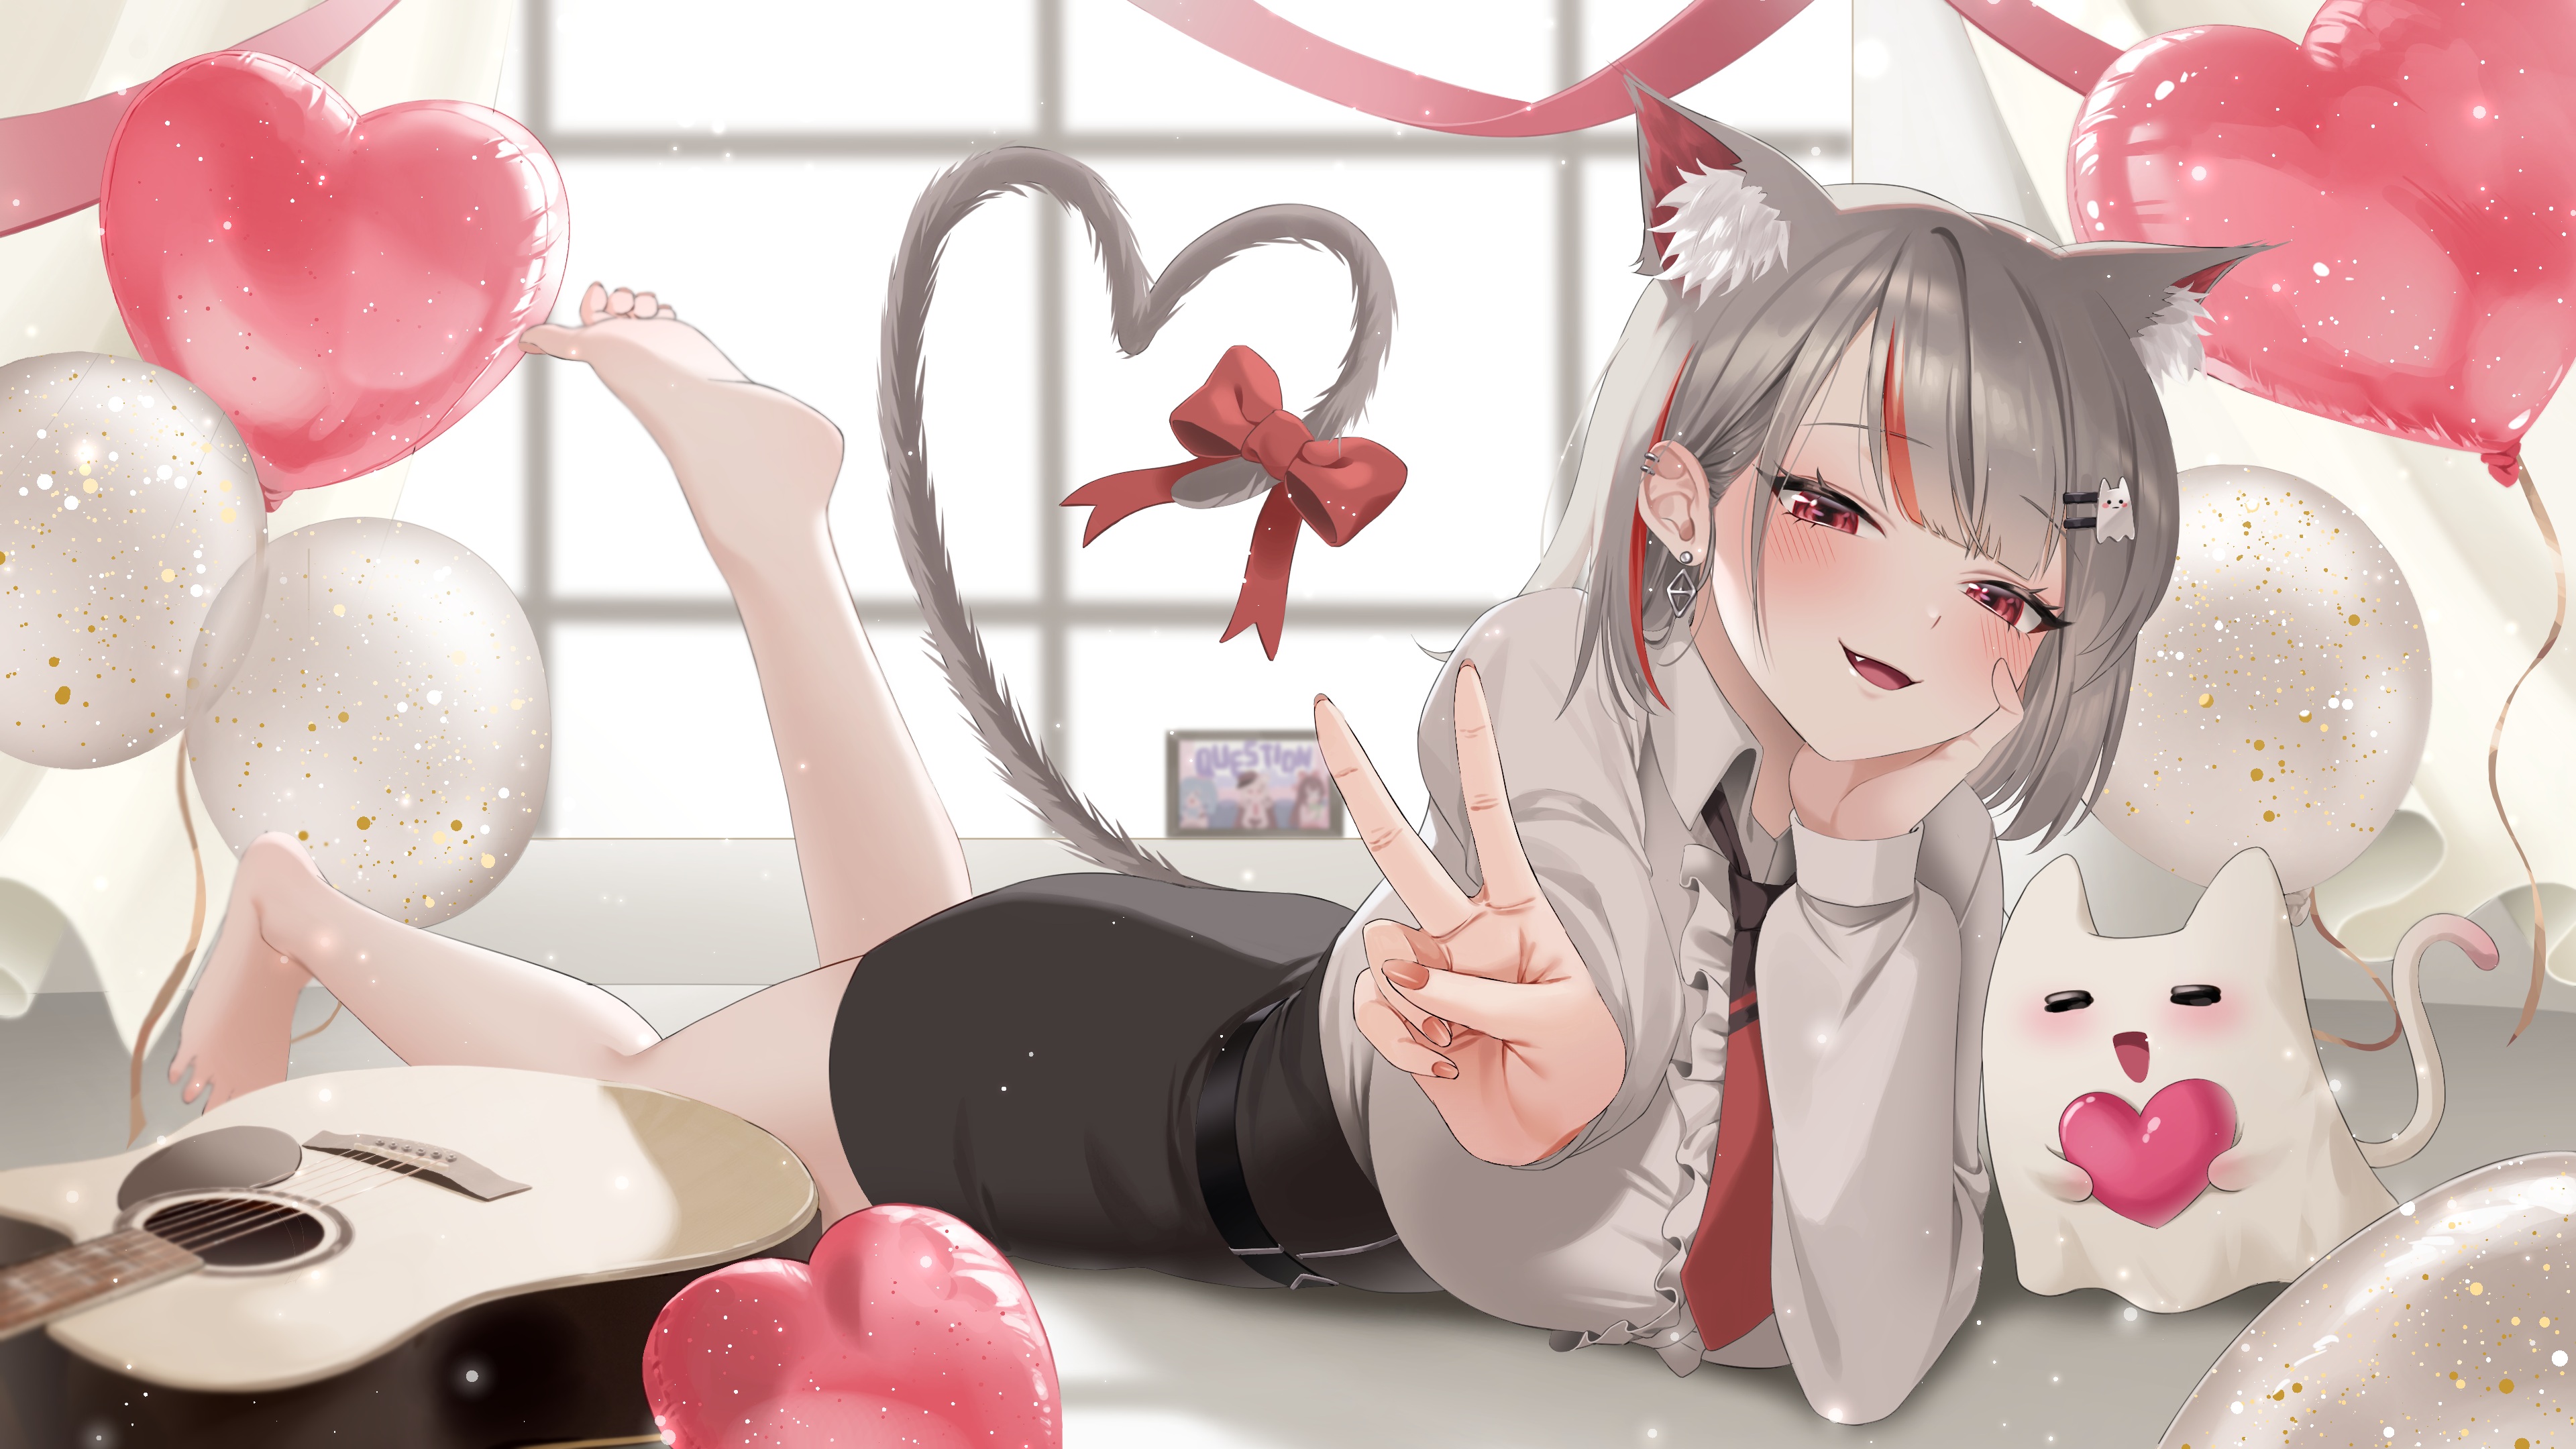 Anime 3840x2160 anime anime girls cat girl cat ears cat tail peace sign lying down lying on front balloon feet bow tie feet in the air blushing earring ear piercing hand on face guitar heart (design) window musical instrument smiling StelLive Virtual Youtuber Neneko Mashiro